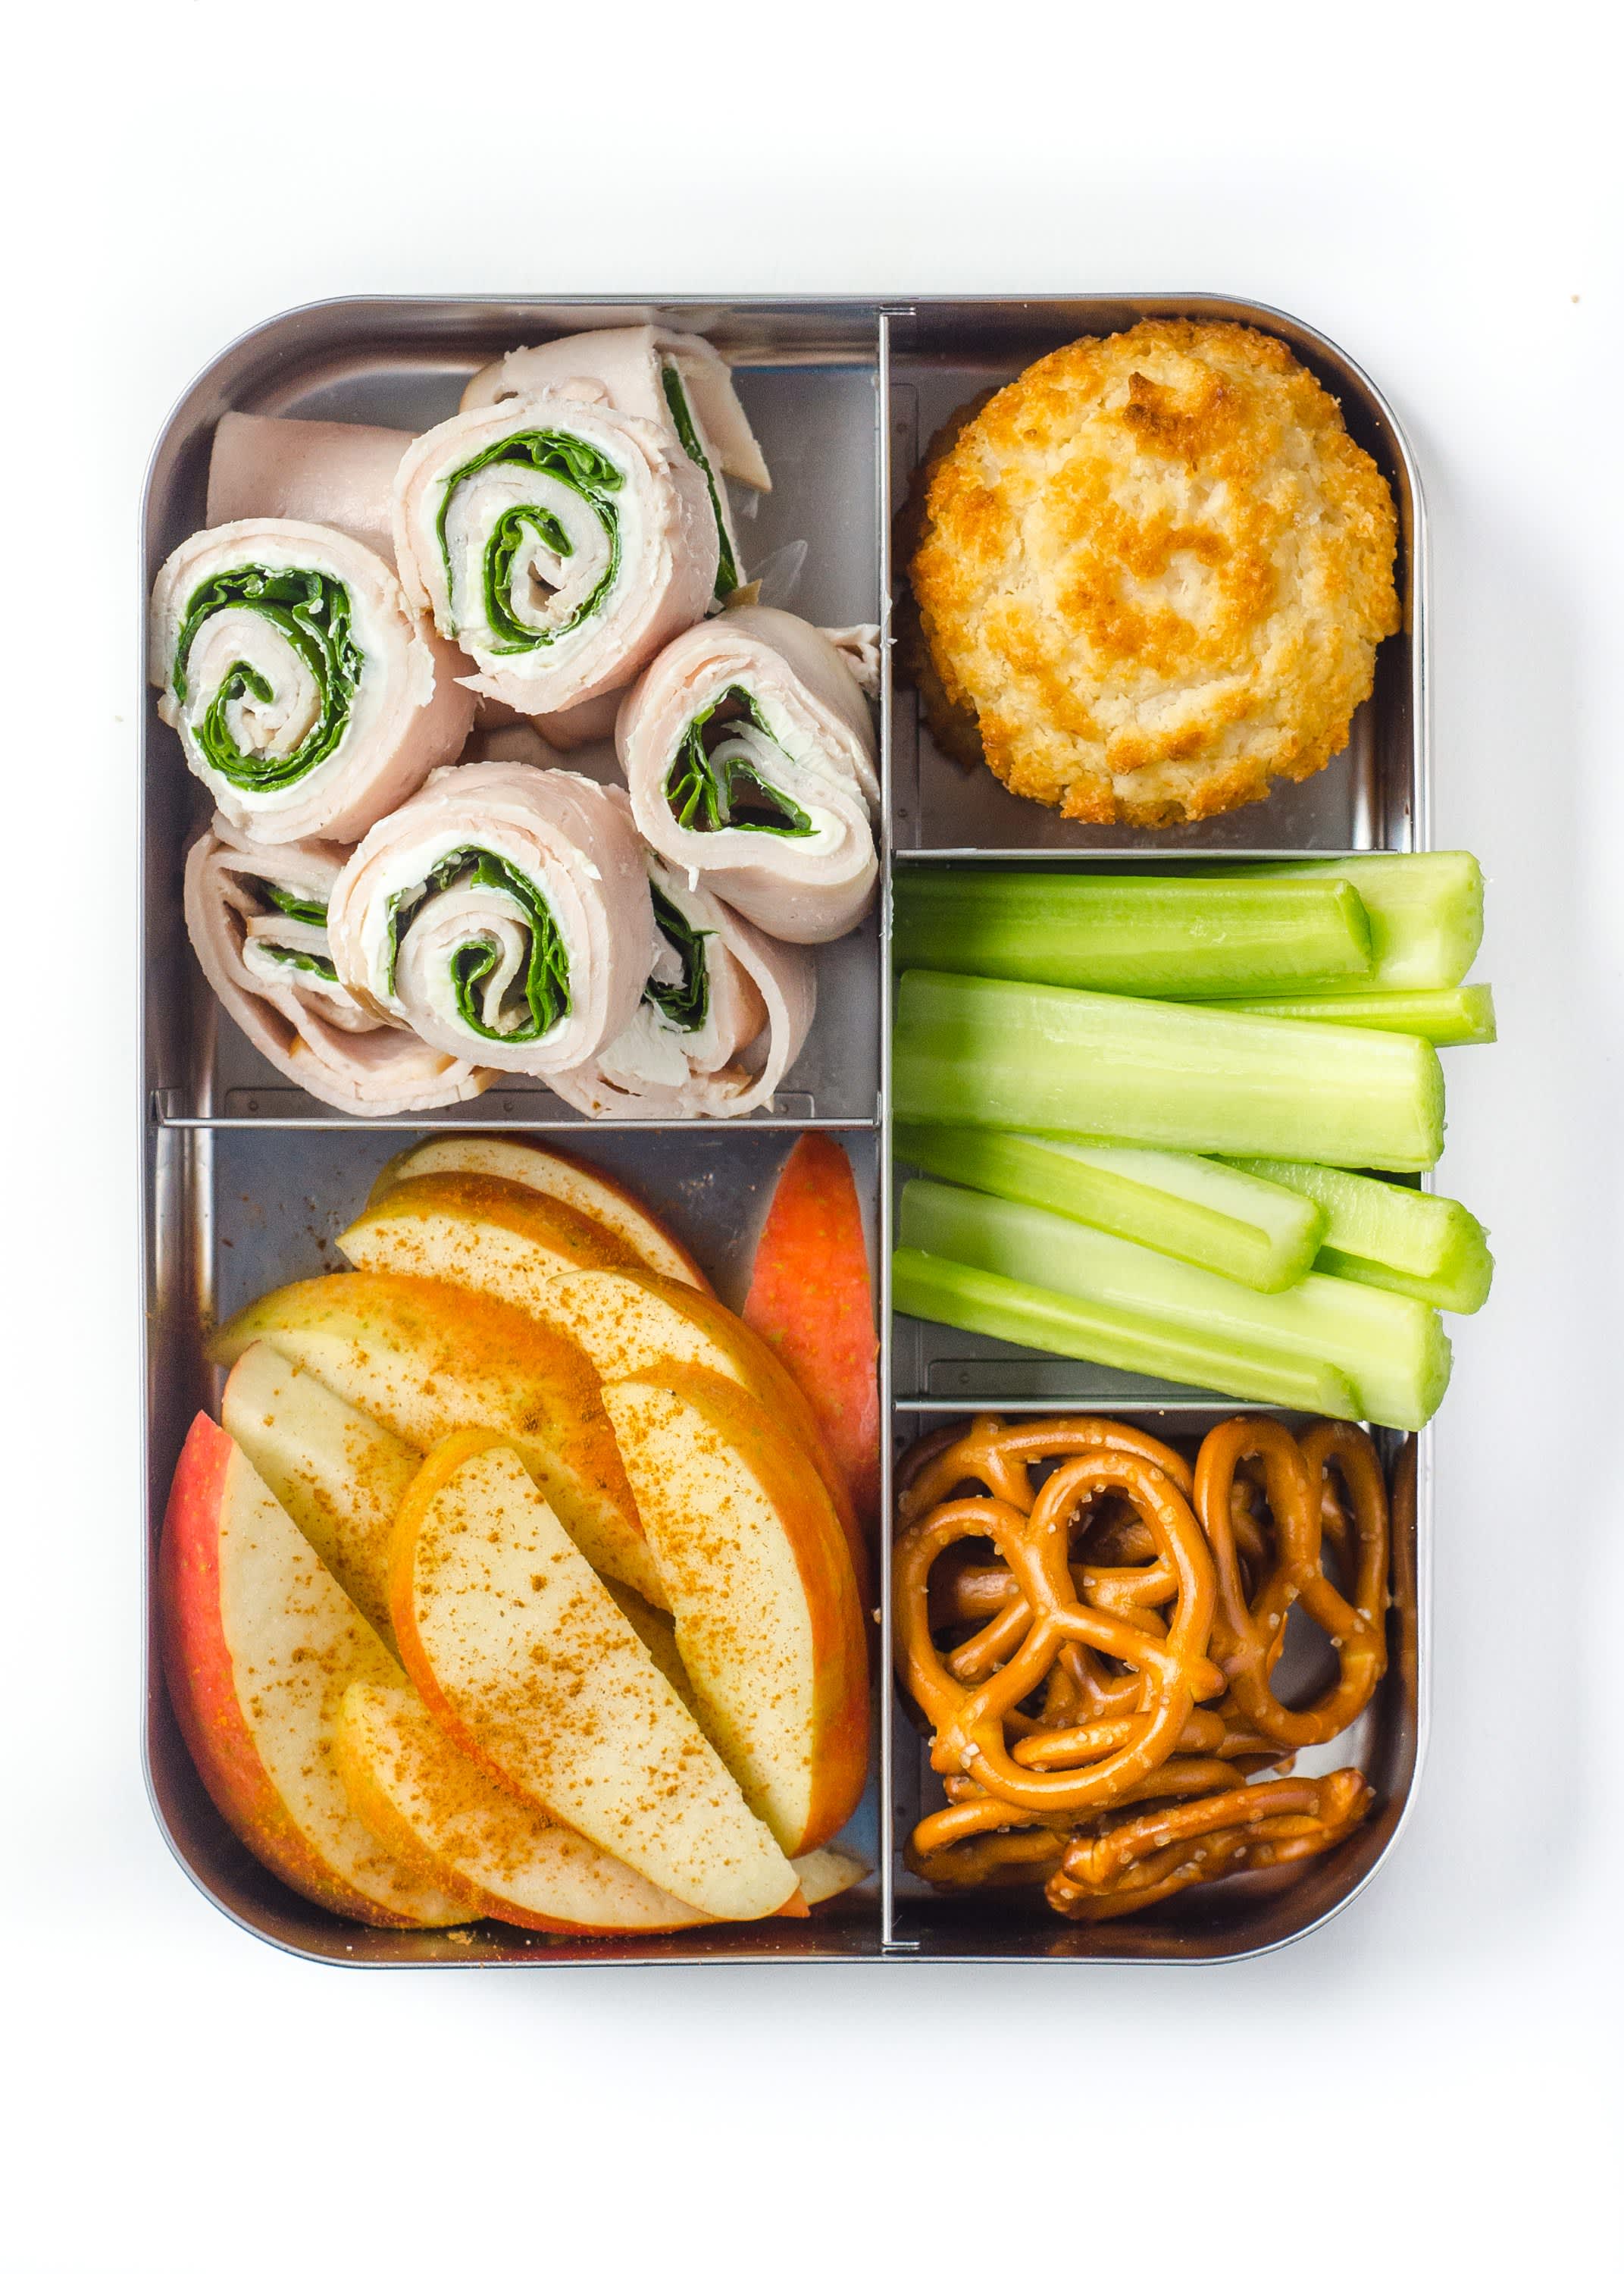 Kids lunches beyond the sandwich.